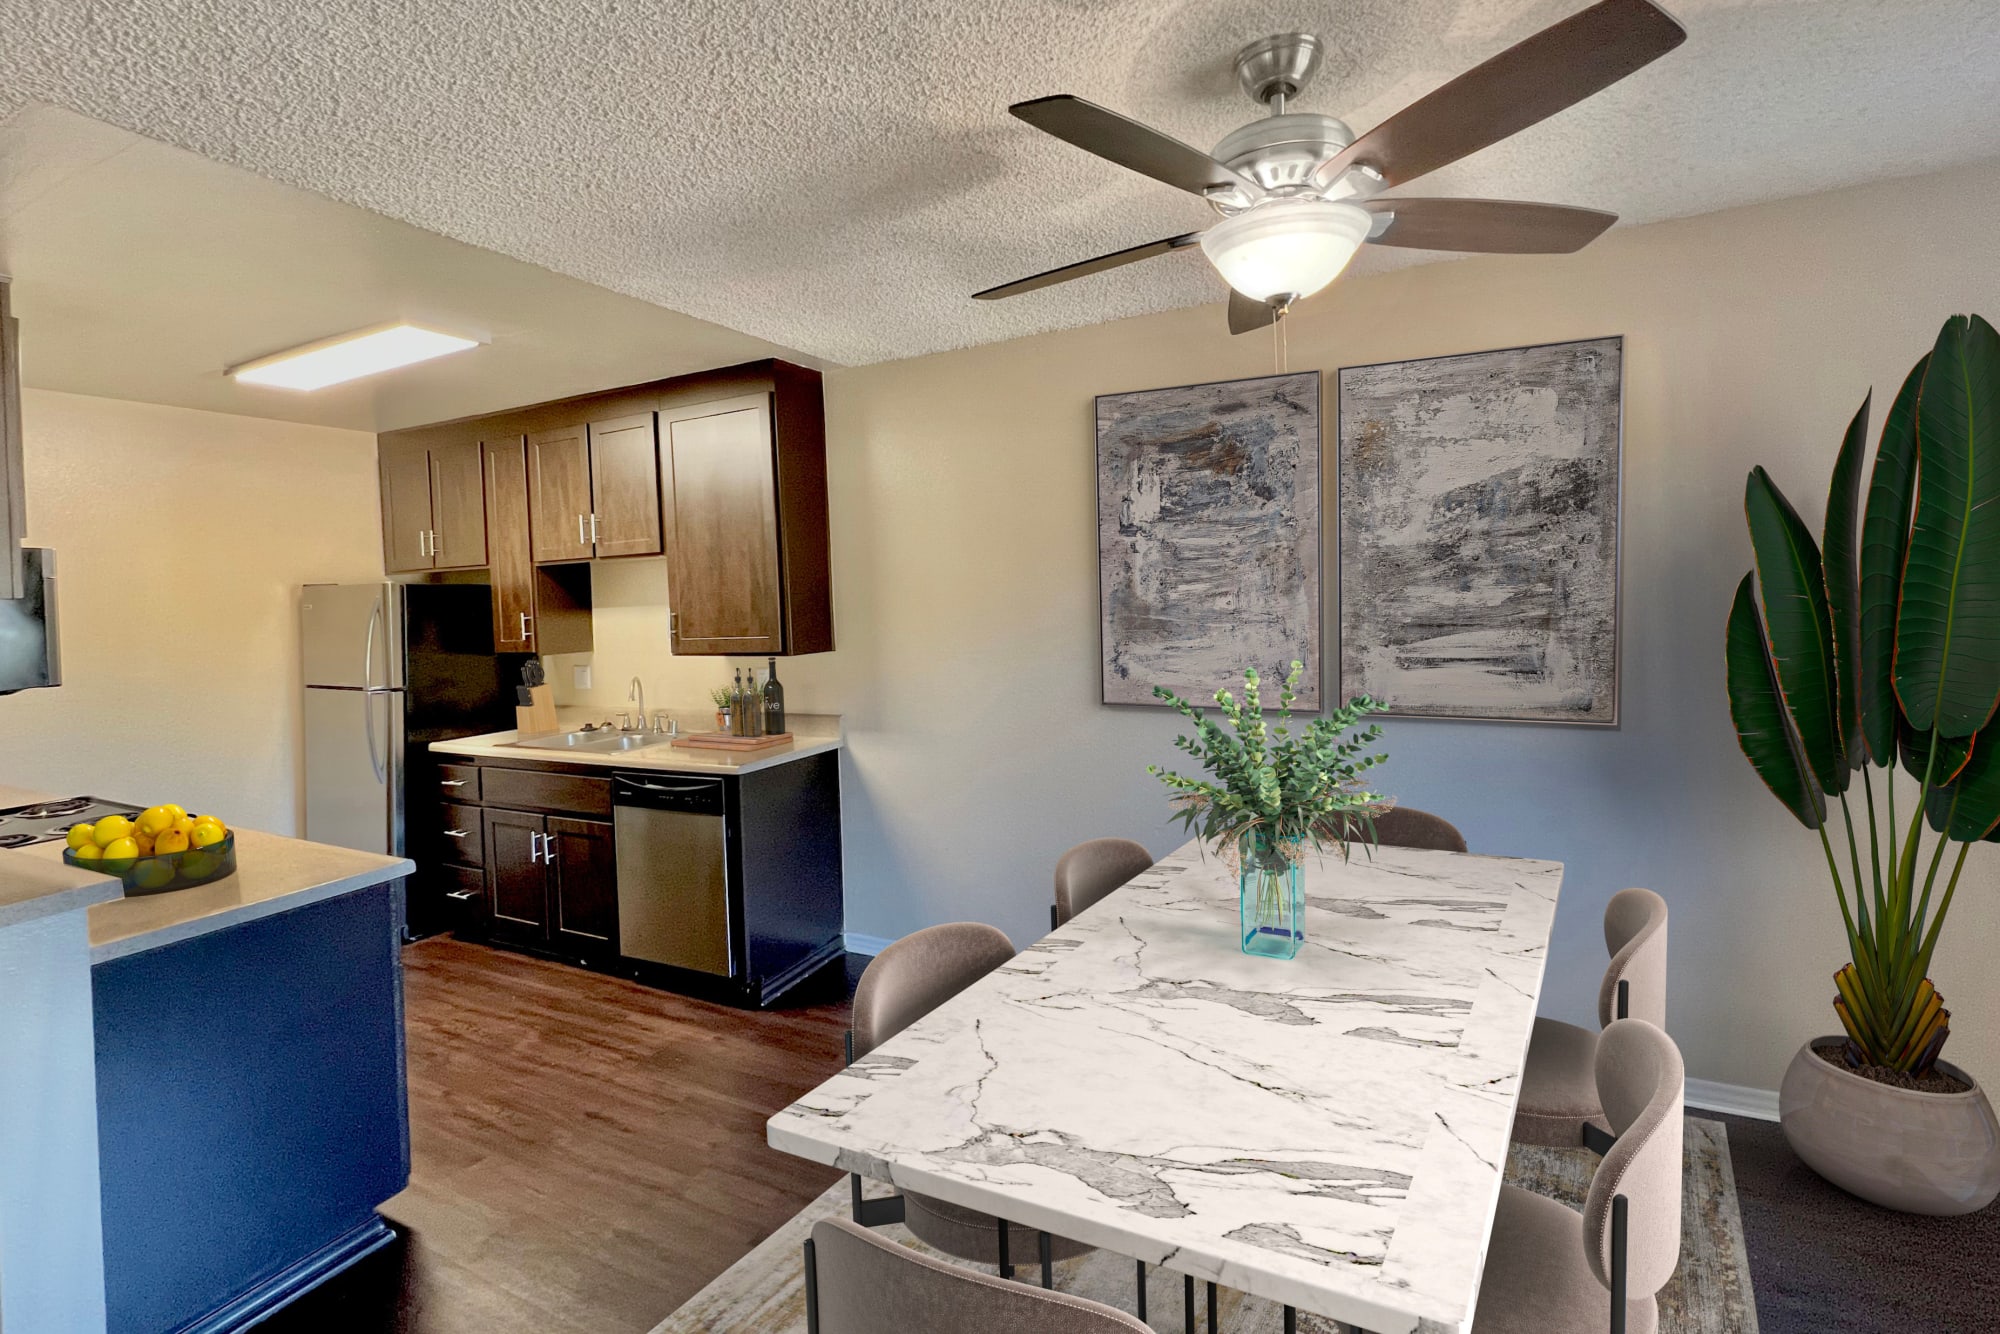 Fully equipped kitchen with stainless steel appliances at Shadow Ridge Apartments in Oceanside, California